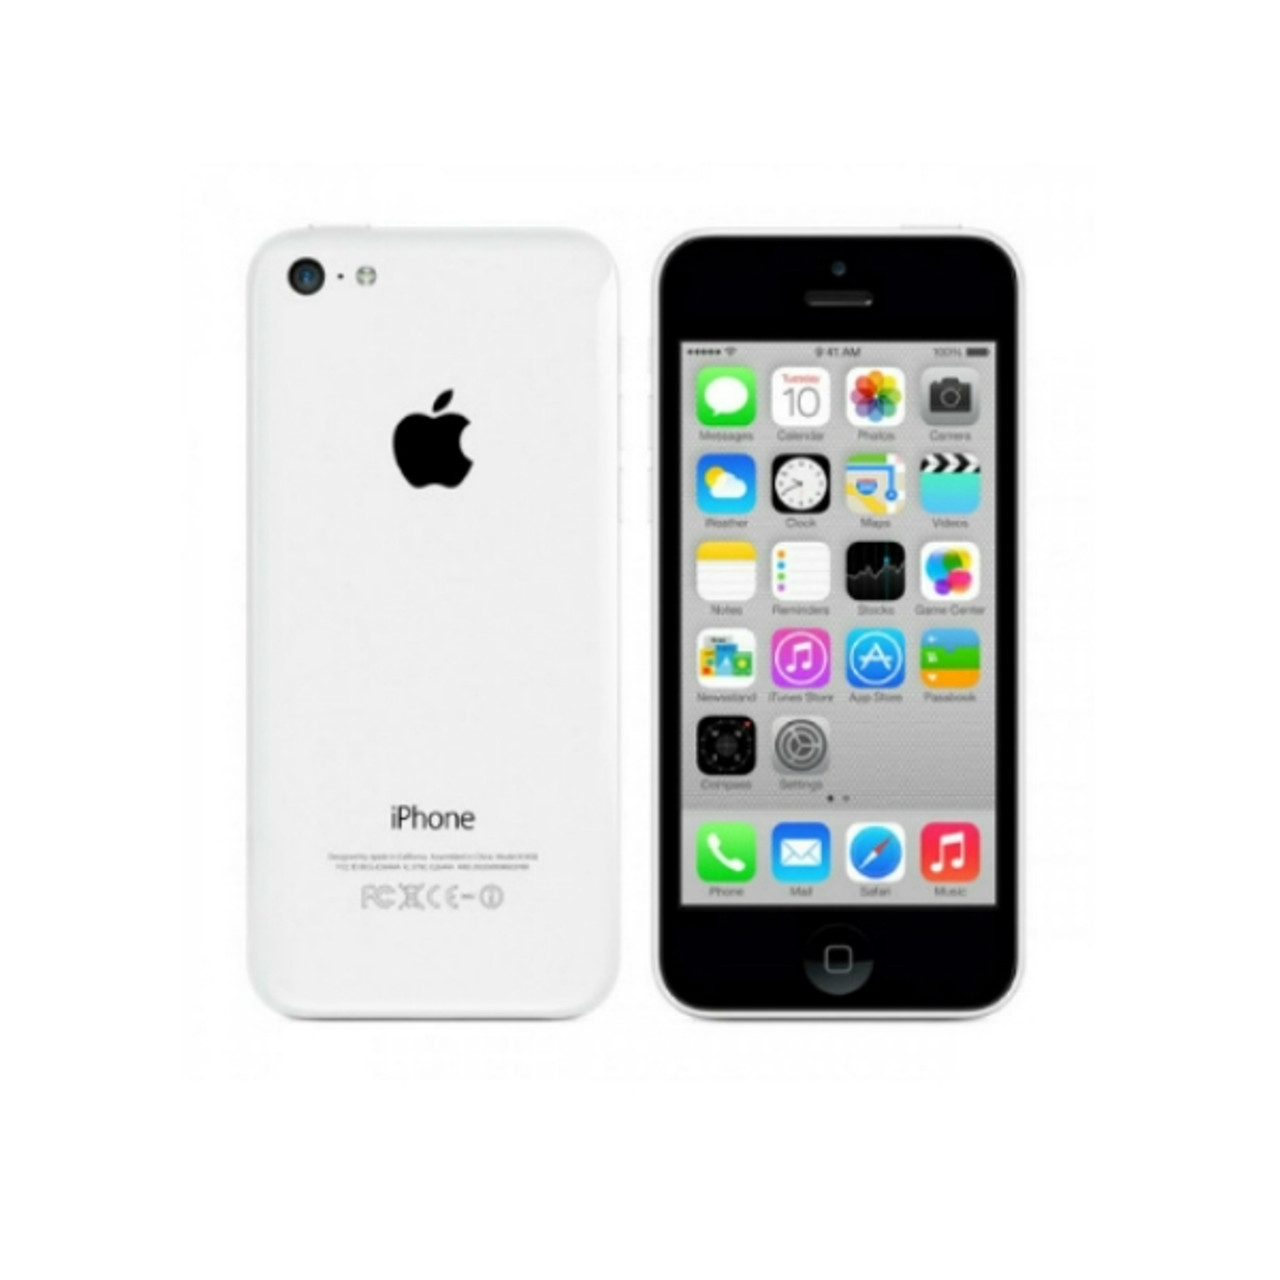 Apple iPhone 5c (Verizon) 32GB - White MF154LL/A - Excellent Condition